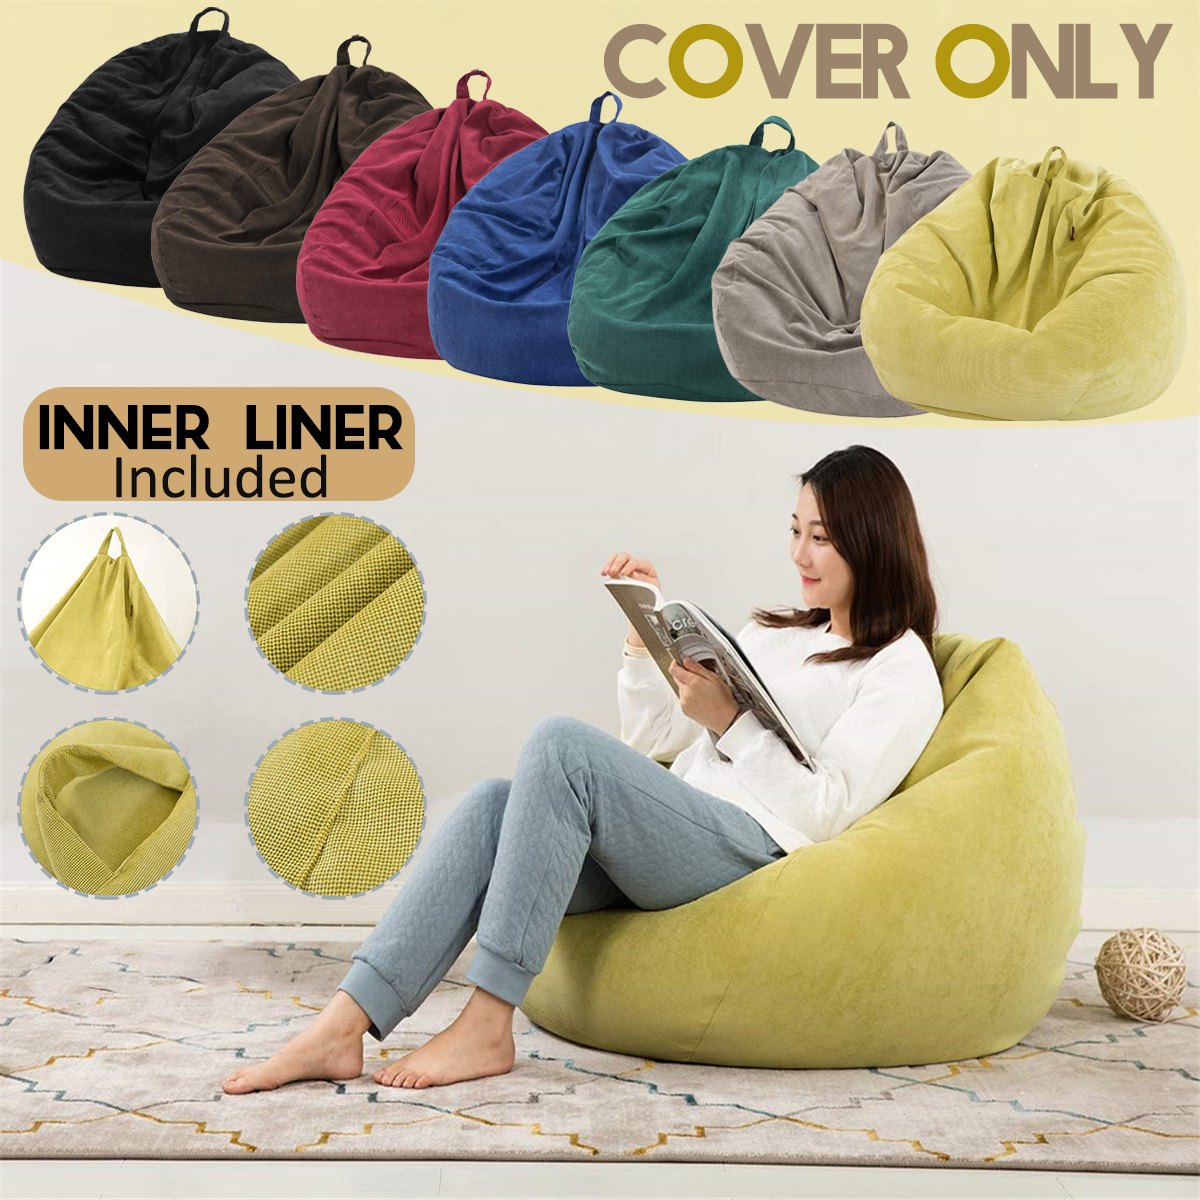 Corduroy Bean Bag Chair 70*80cm Multicolor Gaming Sofa Cover Indoor Lazy Sofa With Mesh Bag Liner Cover 11